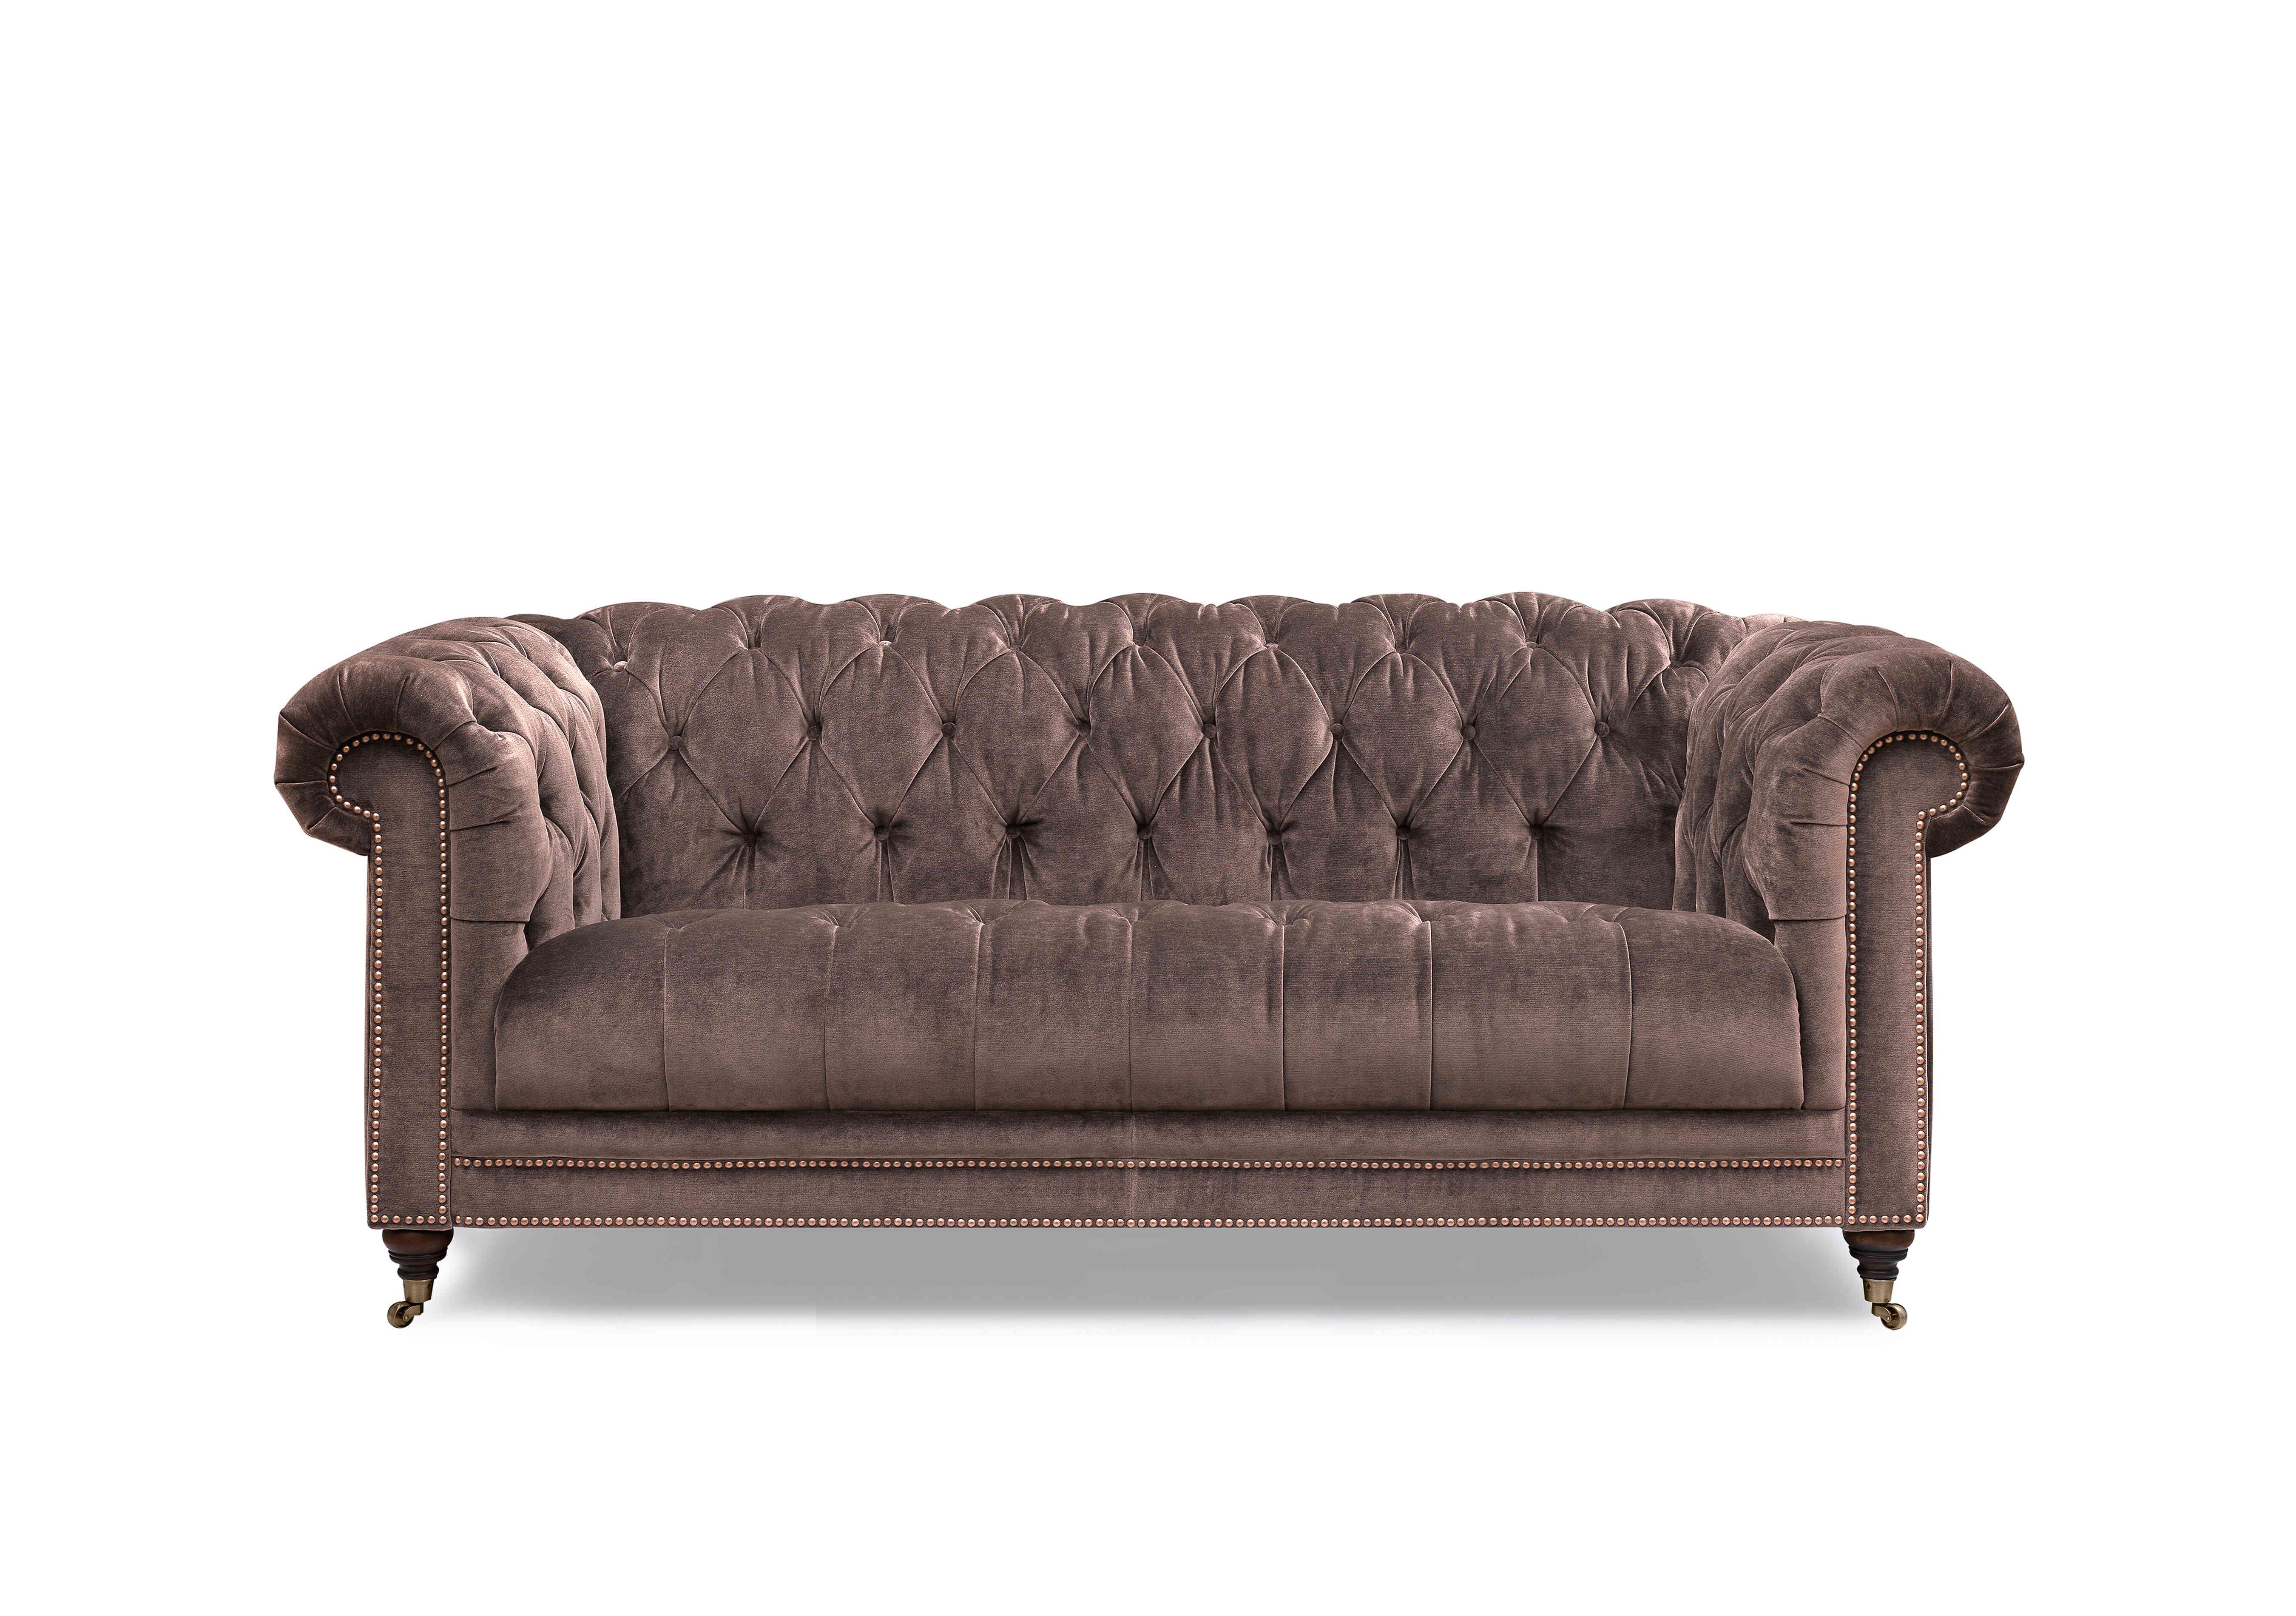 Walter 3 Seater Fabric Chesterfield Sofa with USB-C in X3y1-W023 Antler on Furniture Village